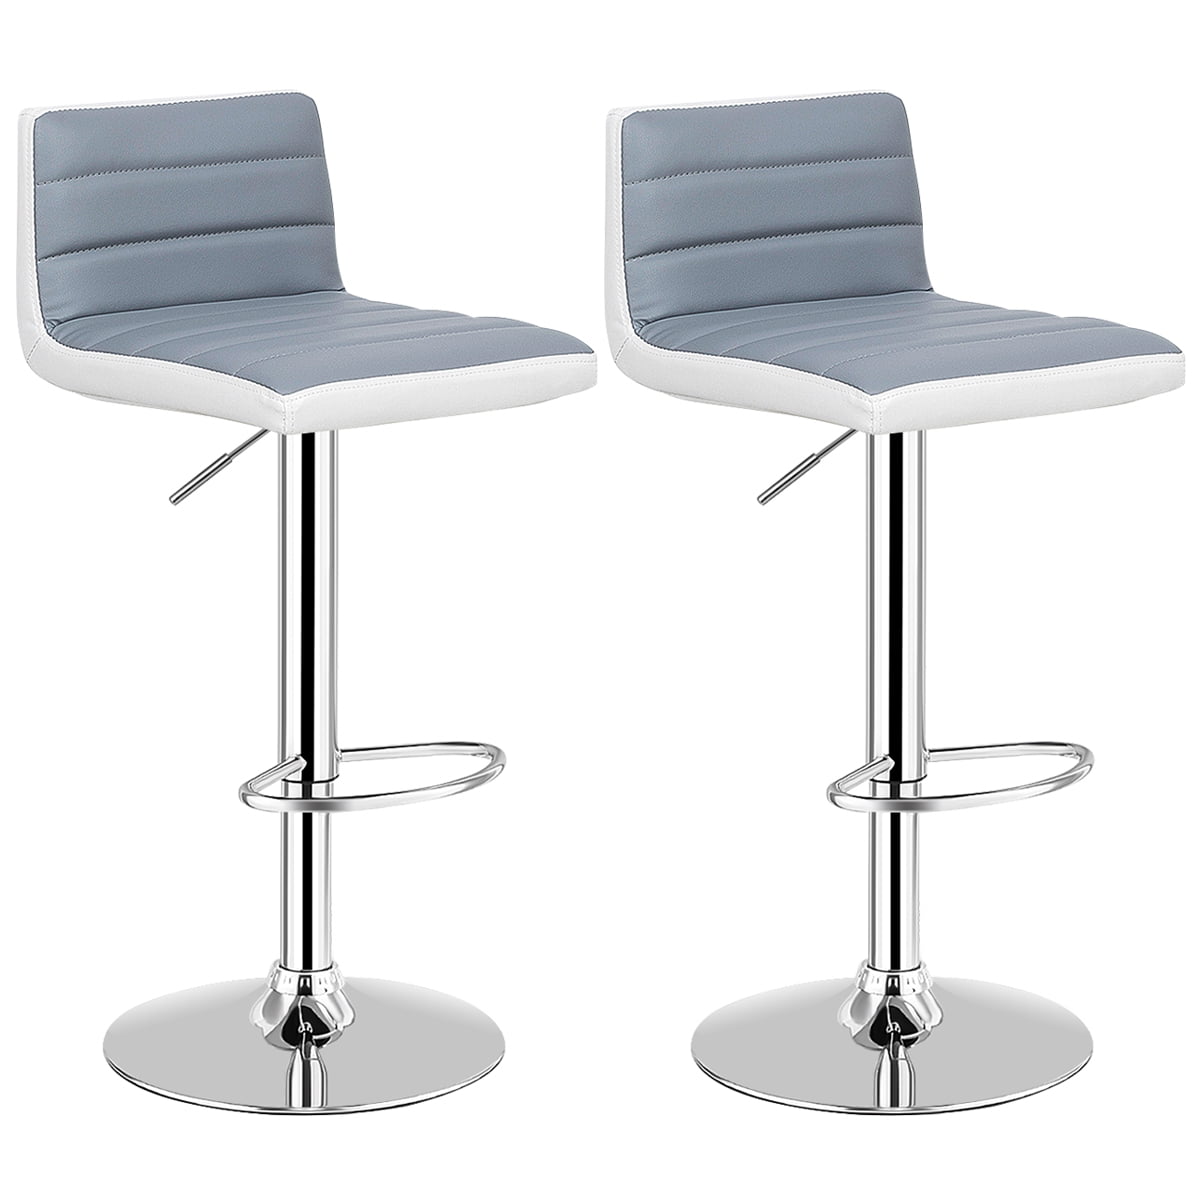 Bar Stool Set Of 2 Adjustable Counter Swivel Chair Synthetic Leather Black White 